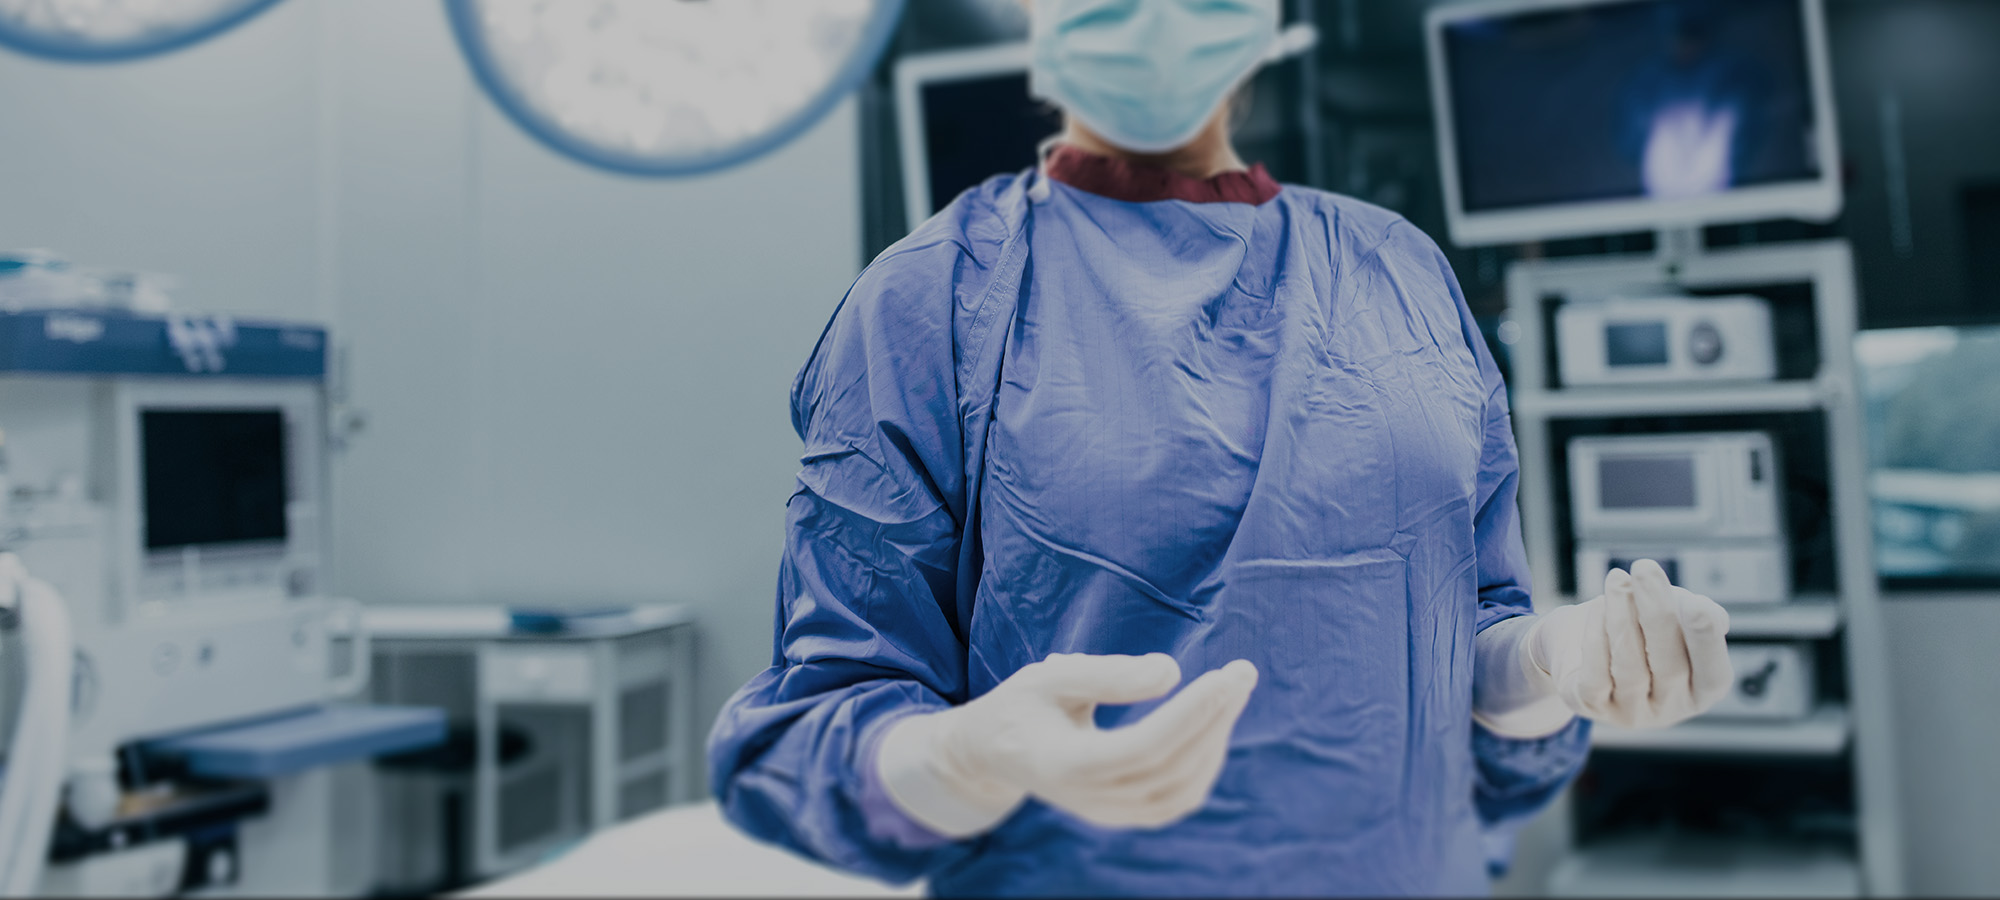 Image of a female surgeon standing in an operating room